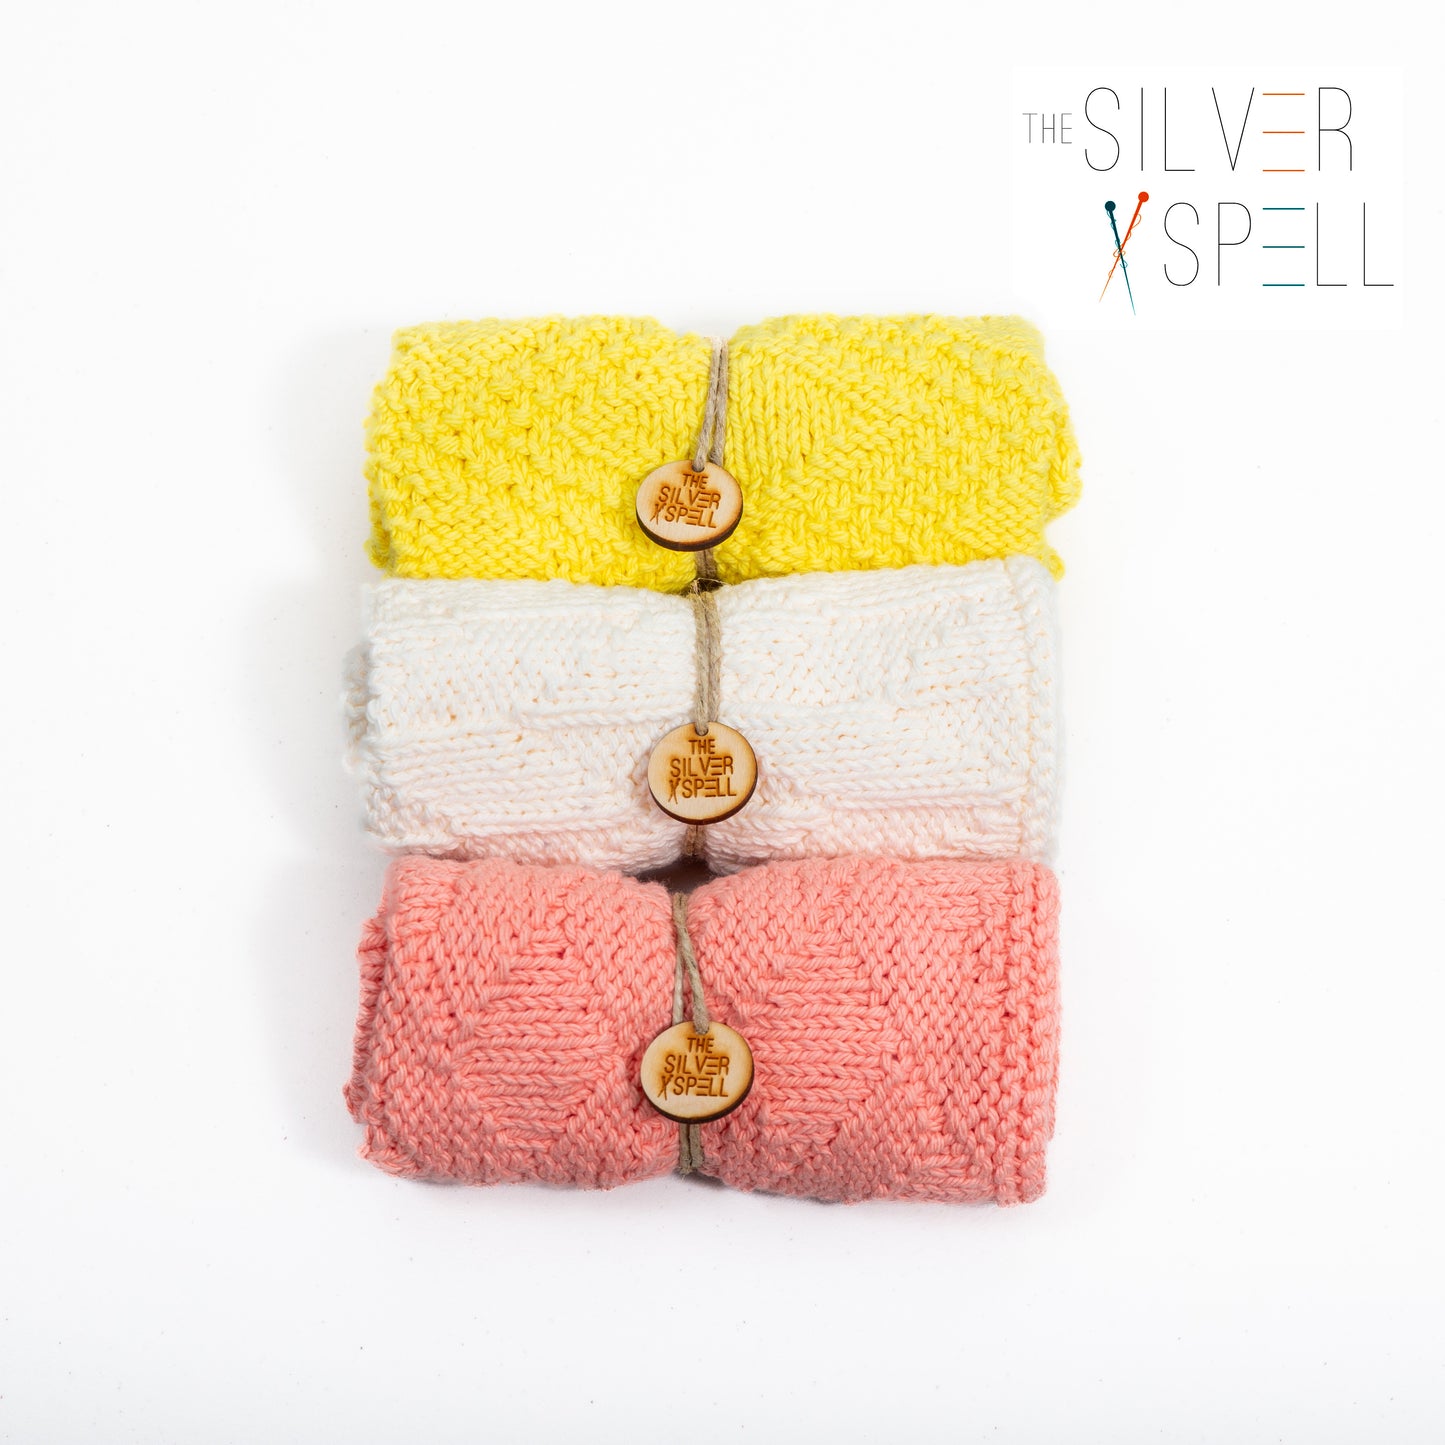 3 Towels (Yellow, White, Coral)